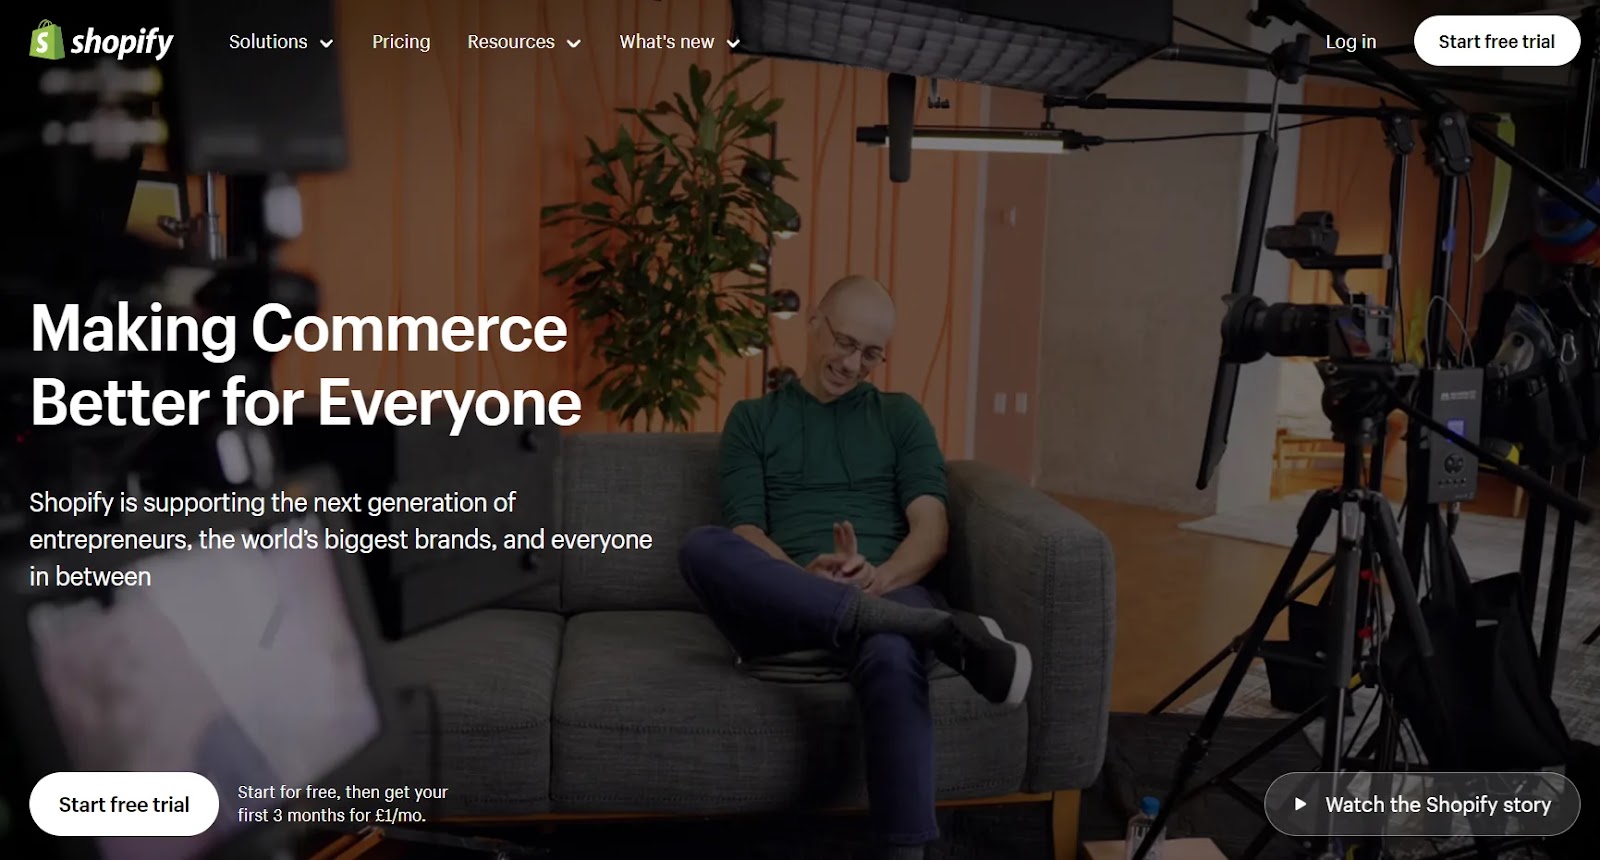 Shopify's landing page